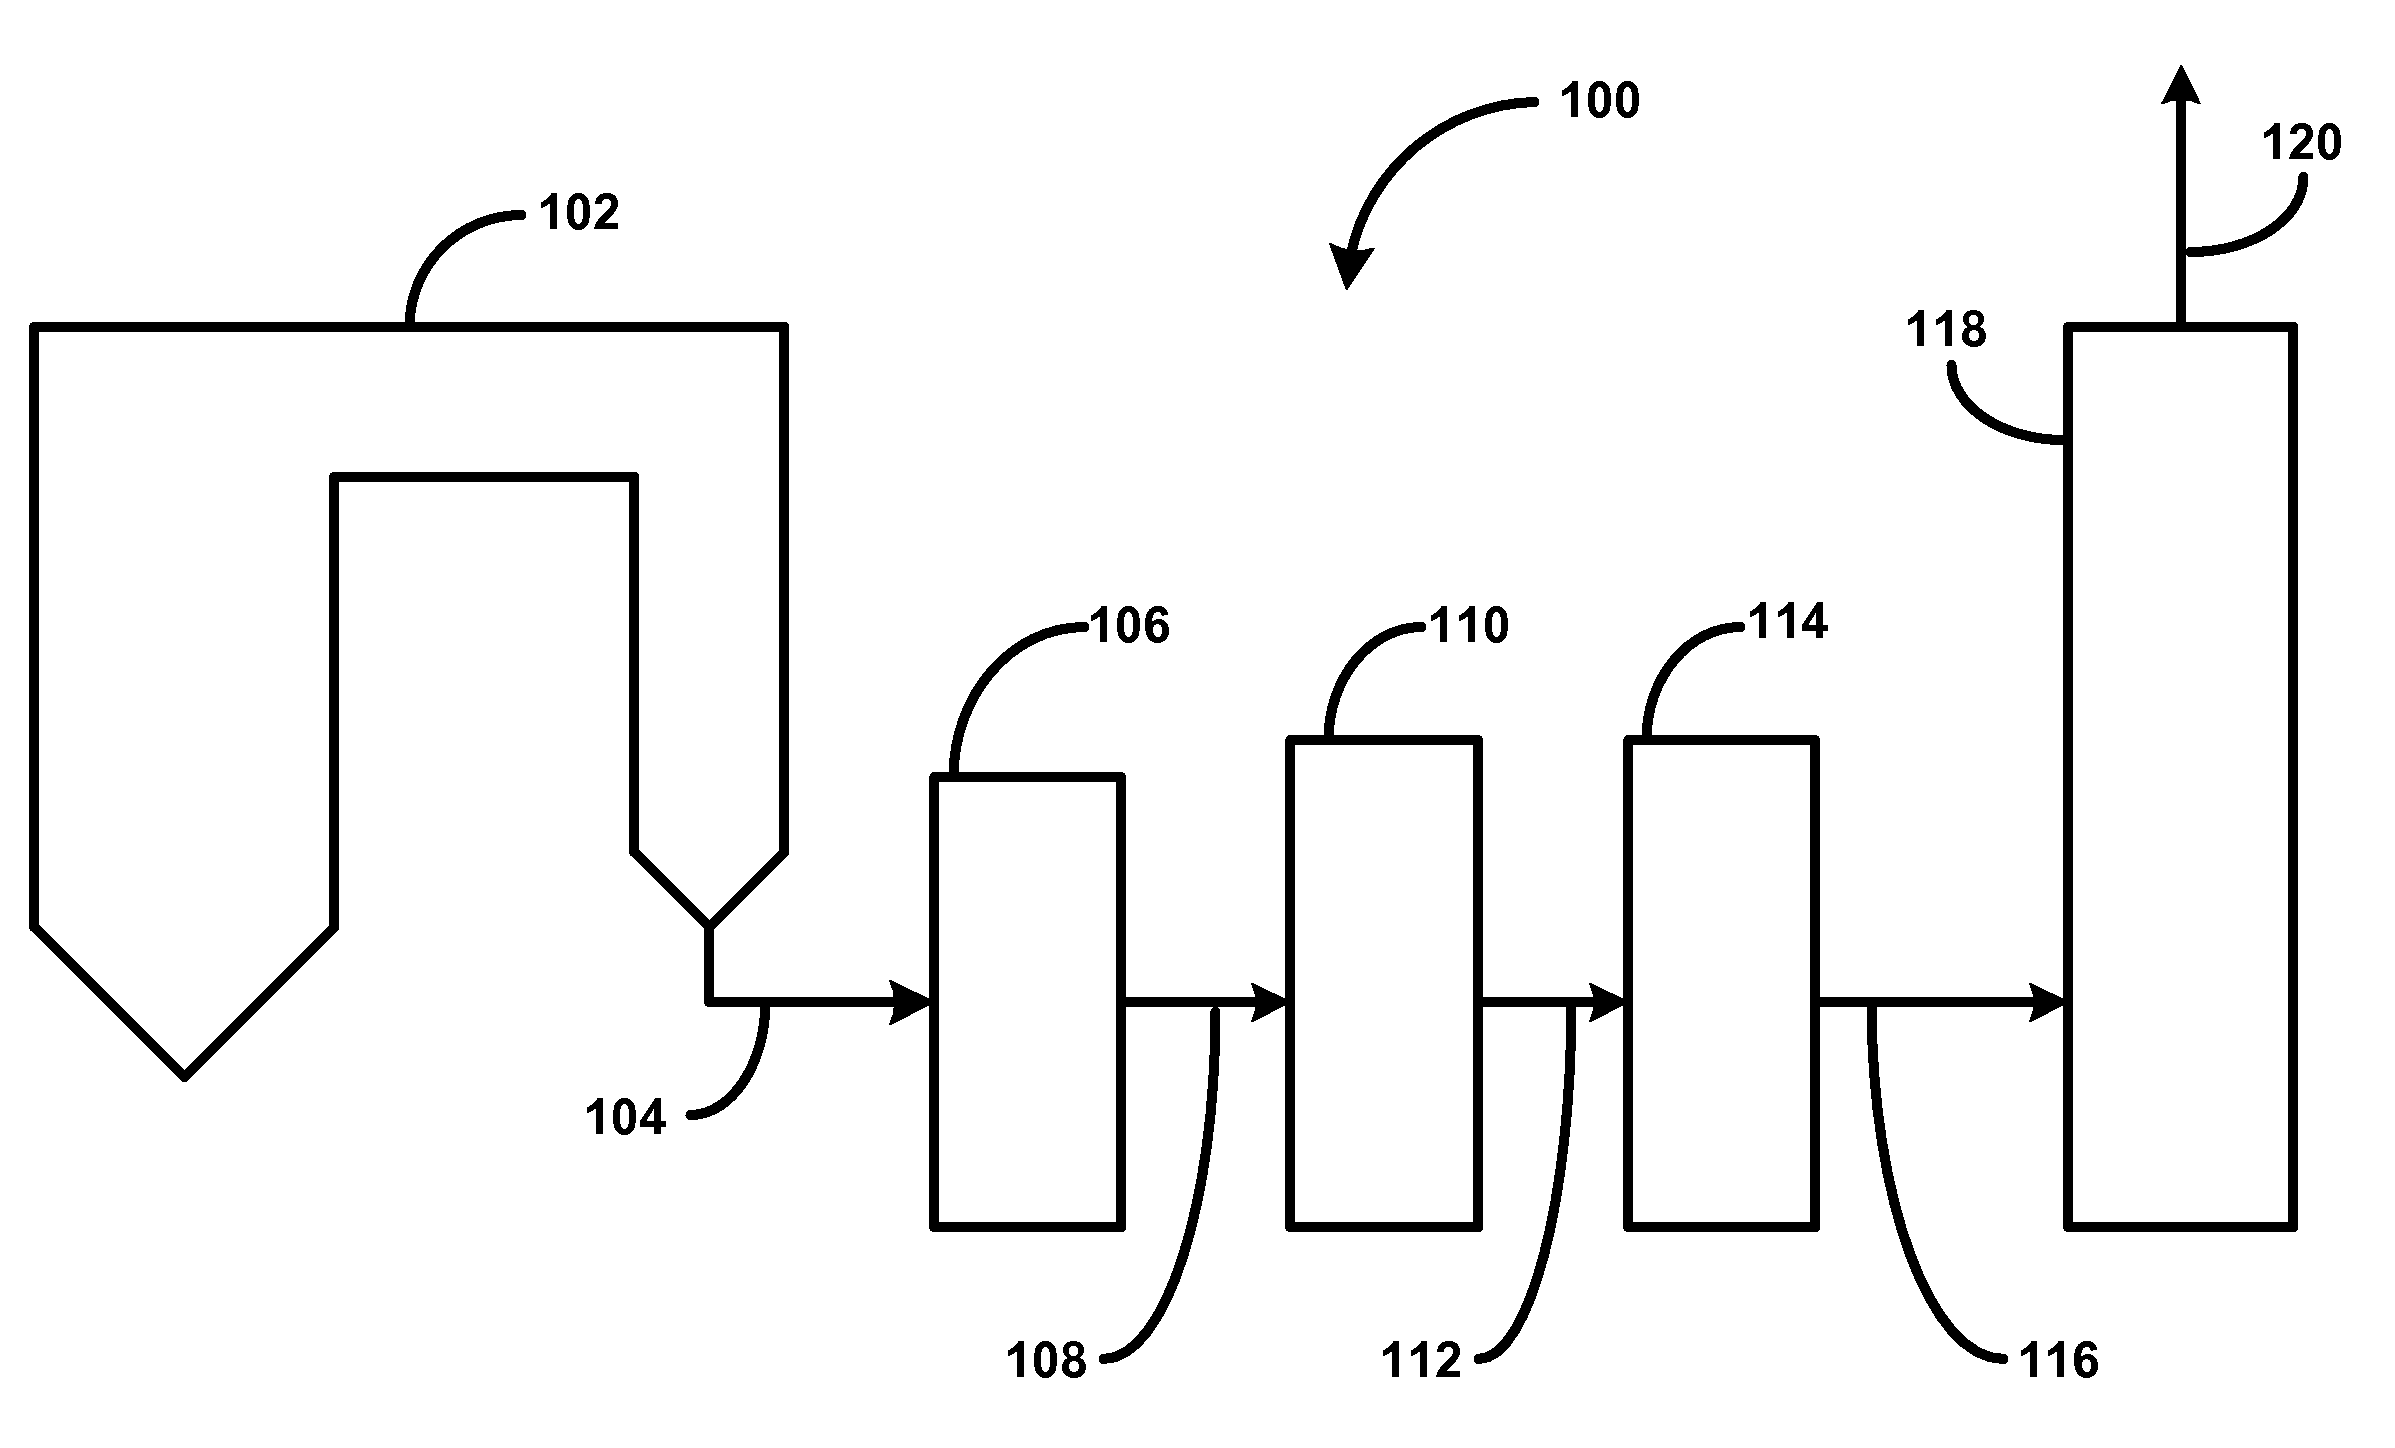 Method and Apparatus for the Removal of Carbon Dioxide from a Gas Stream